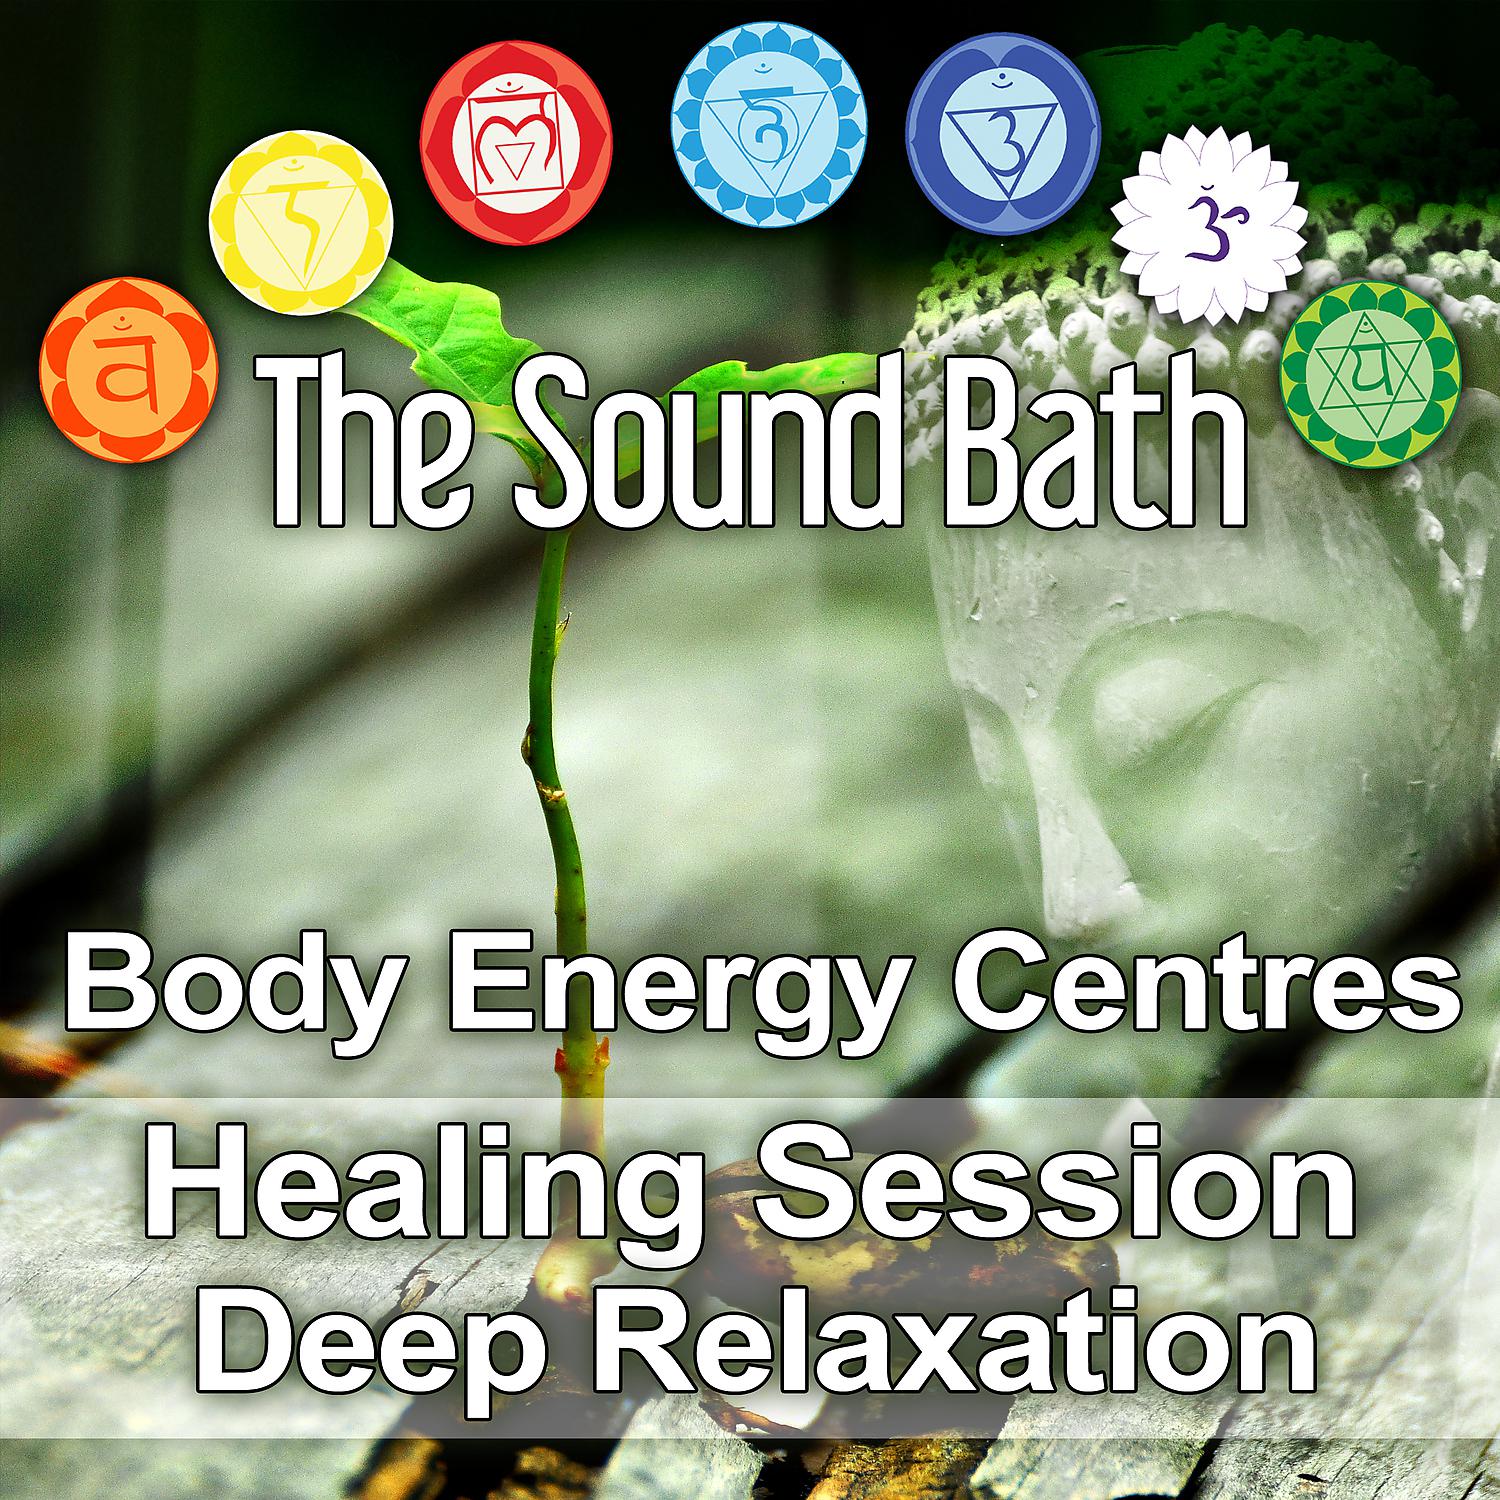 Постер альбома The Sound Bath: Body Energy Centres Healing Session - Deep Relaxation, Rejuvenation and an Acceleration of Inward Journey, Waves of Peace, Heightened Awareness, Relaxation of the Mind, Spirit & Body